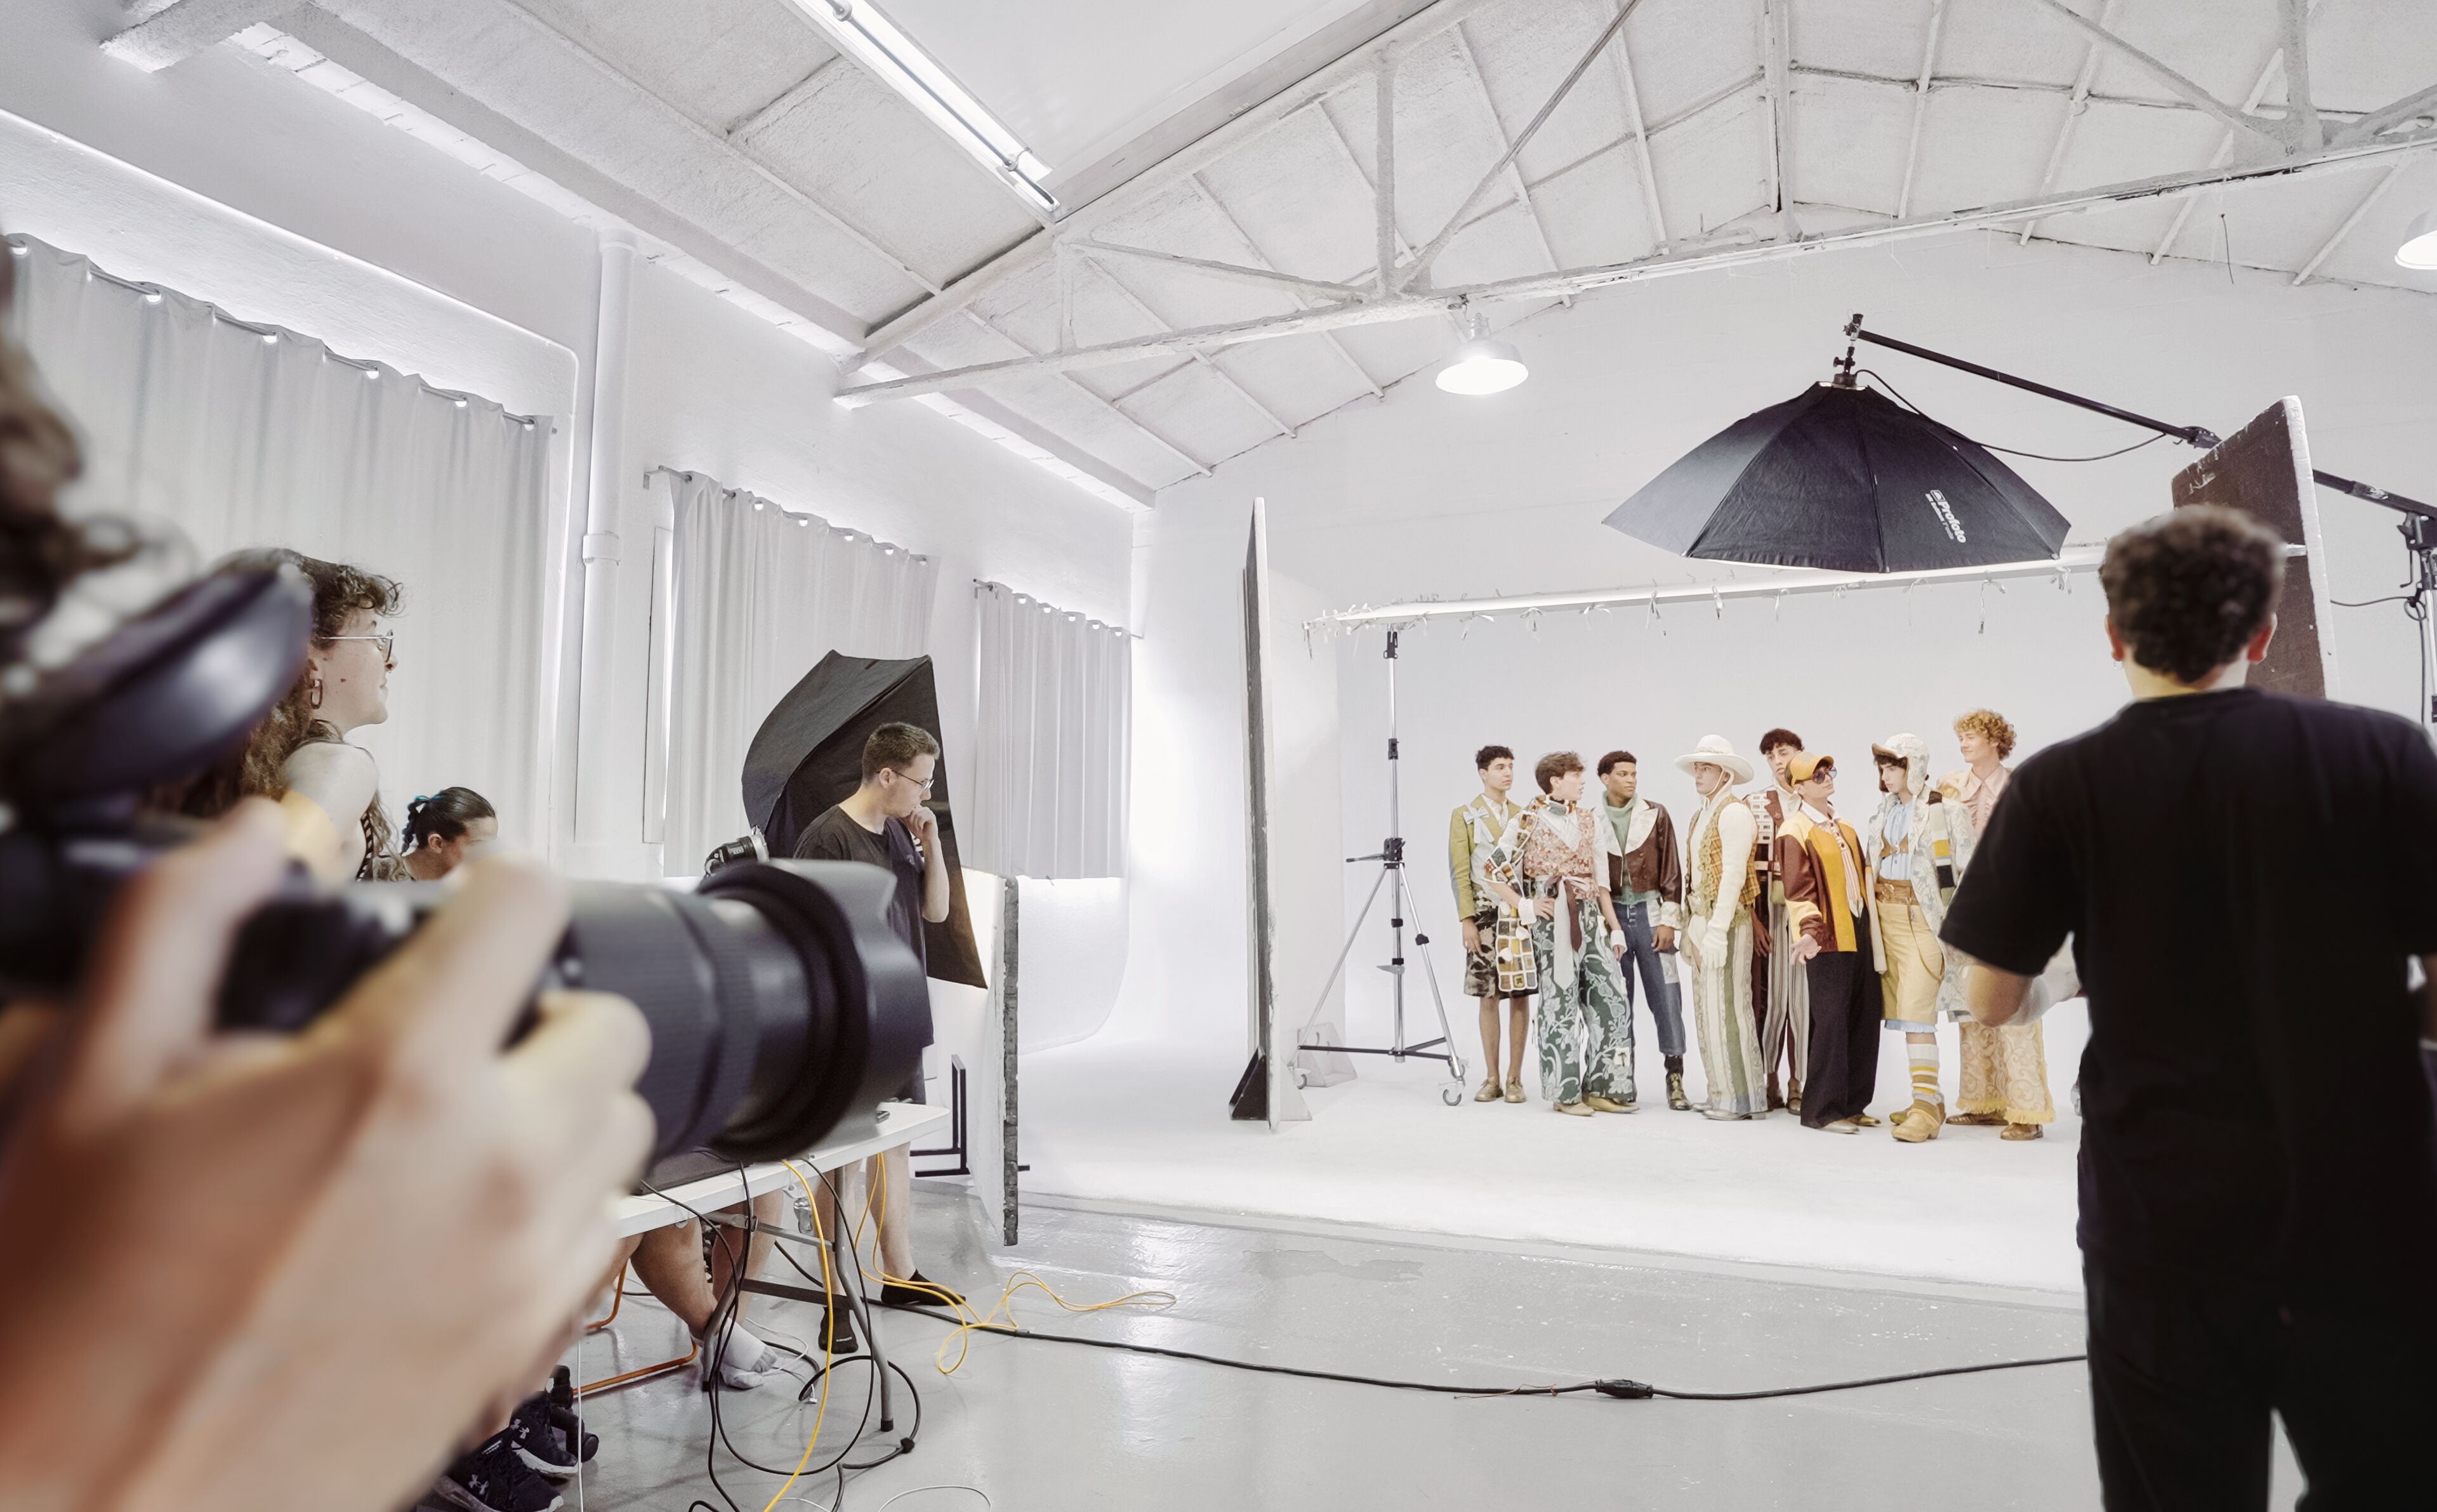 A behind-the-scenes look at a fashion photo shoot with models and photographers in a professional studio setting.